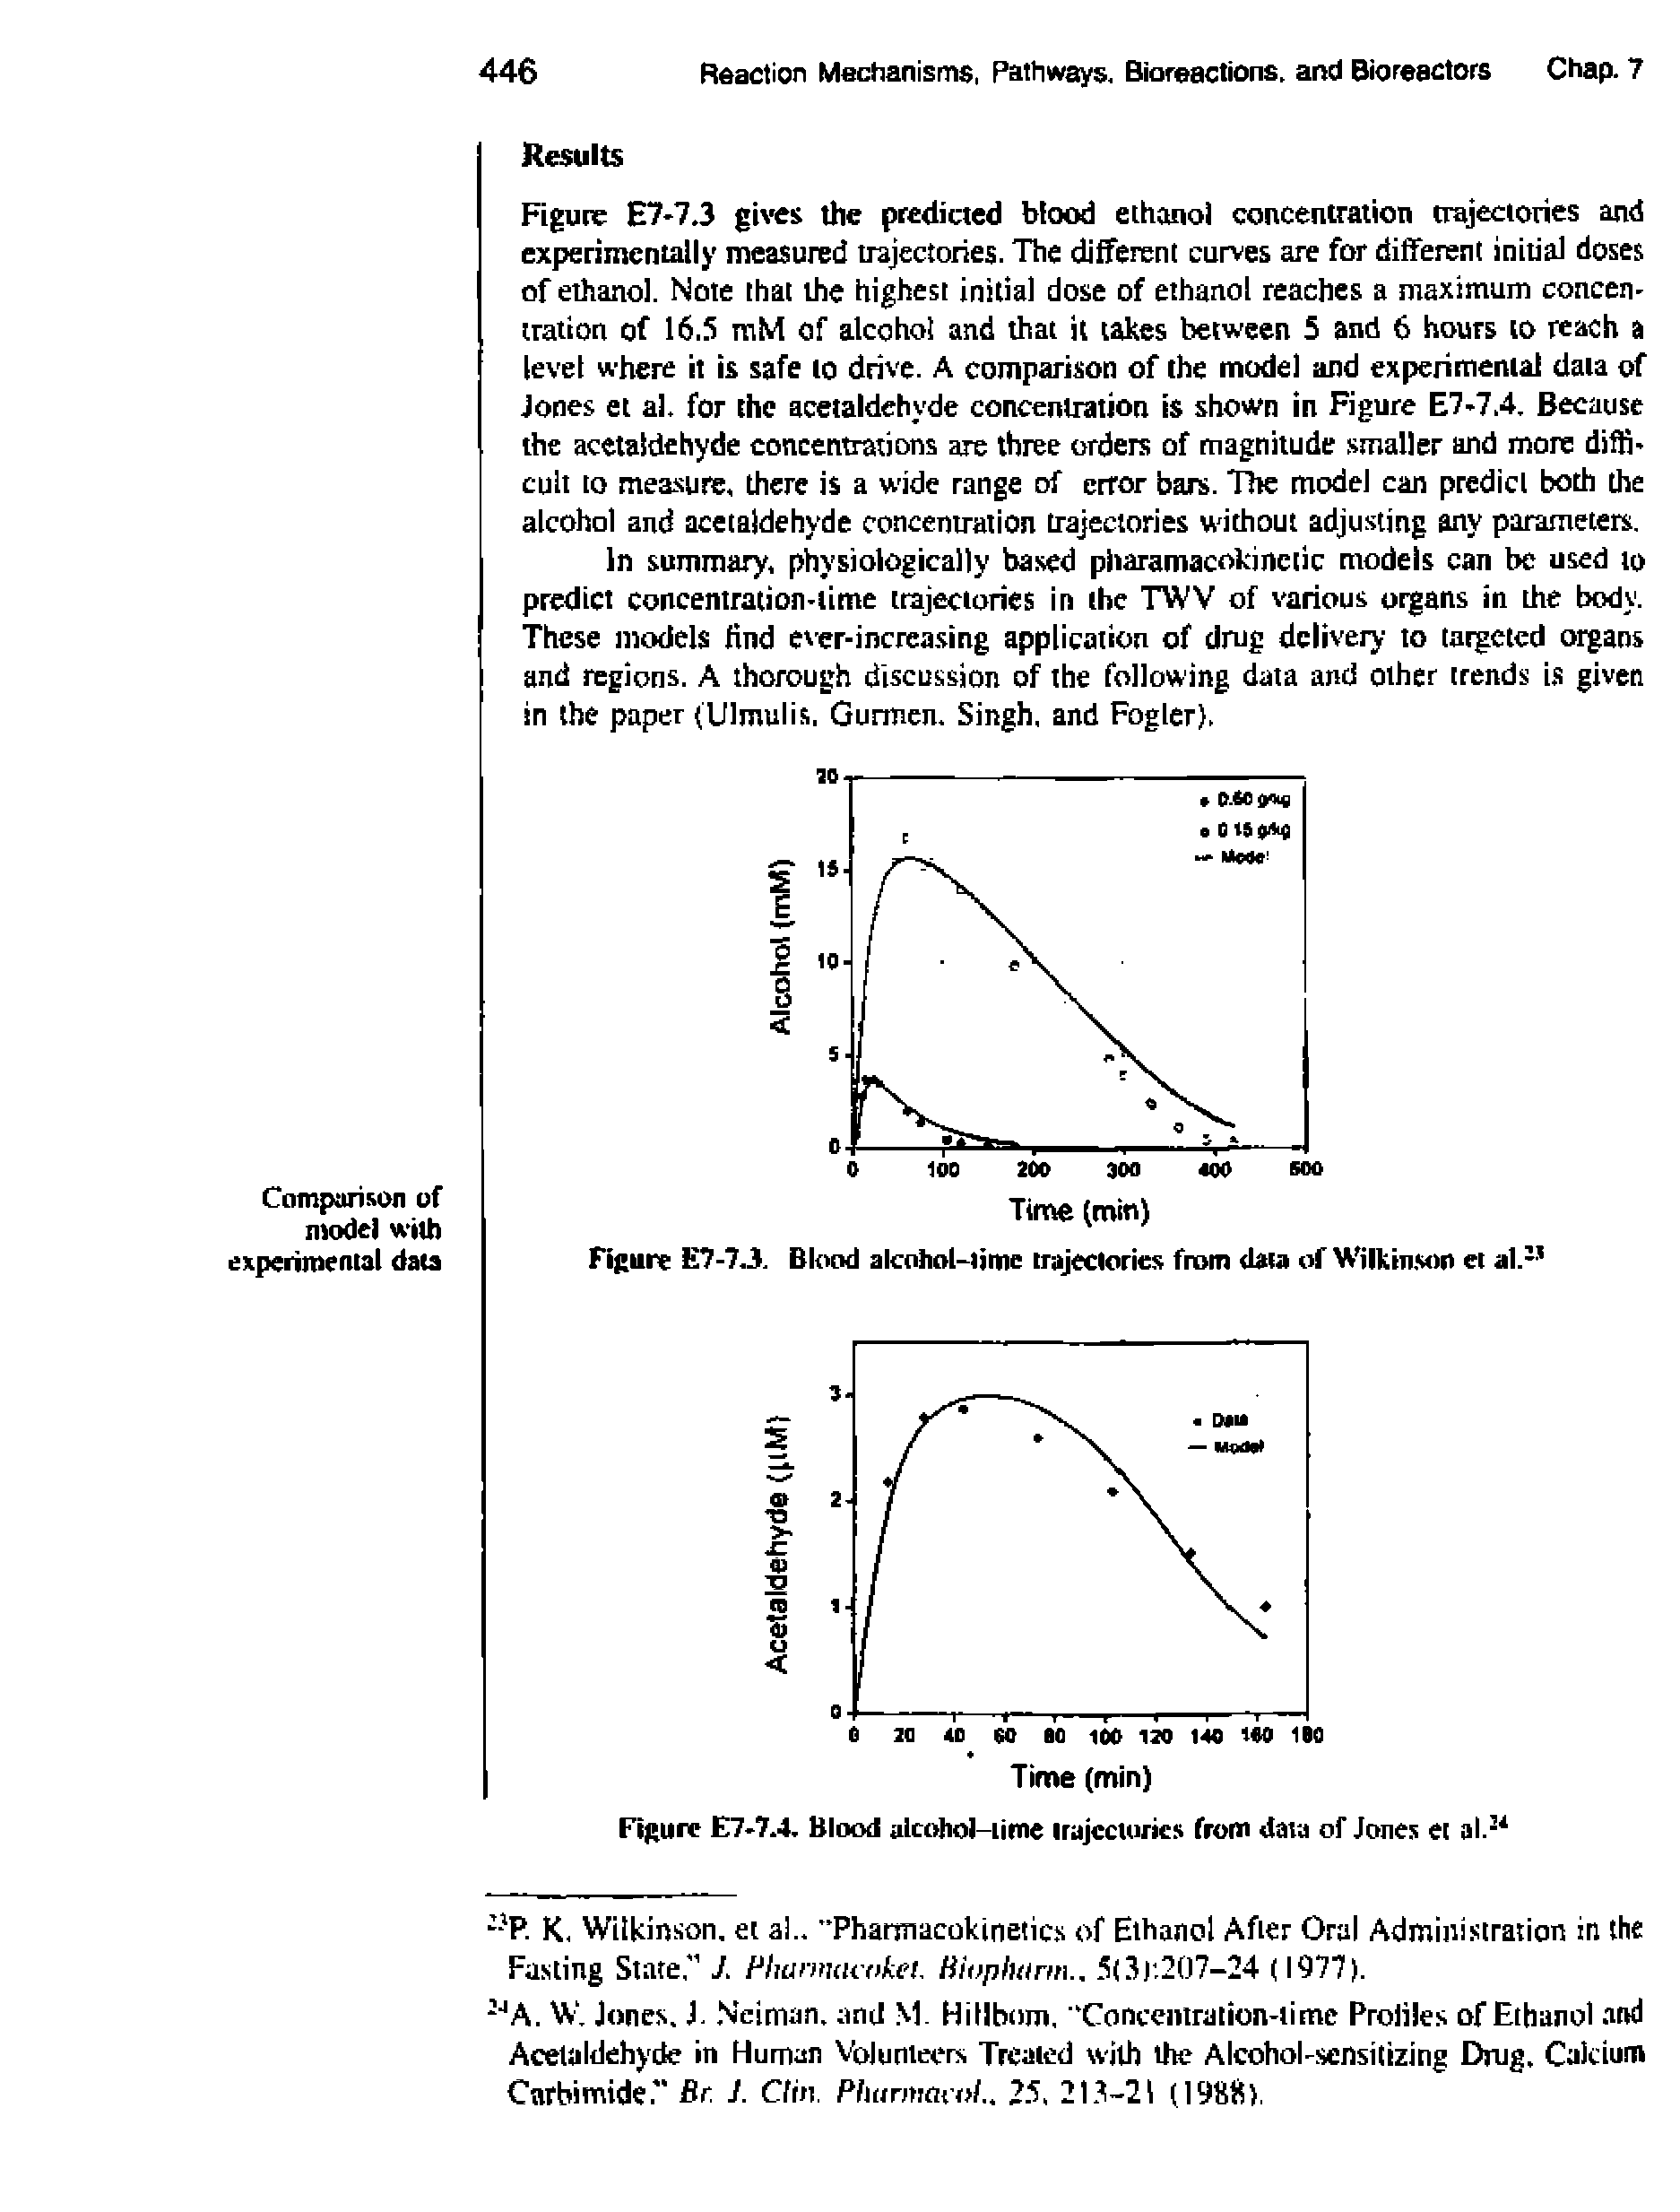 Figure E7-7.3 gives the predicted blood ethanol concentration trajectories and experimentally measured trajectories. The different curves are for different initial doses of ethanol. Note that the highest initial dose of ethanol reaches a maximum concentration of 16.5 raM of alcohol and that it takes between 5 and 6 hours to reach a level where it is safe to drive. A comparison of the model and experimental data of Jones et al. for the acetaldehyde concentration is shown in Figure E7-7.4, Because the acetaldehyde concentrations are three orders of magnitude smaller and more difficult to measure, there is a wide range of error bars. The model can predict both the alcohol and acetaldehyde concenu-ation trajectories without adjusting any parameters.